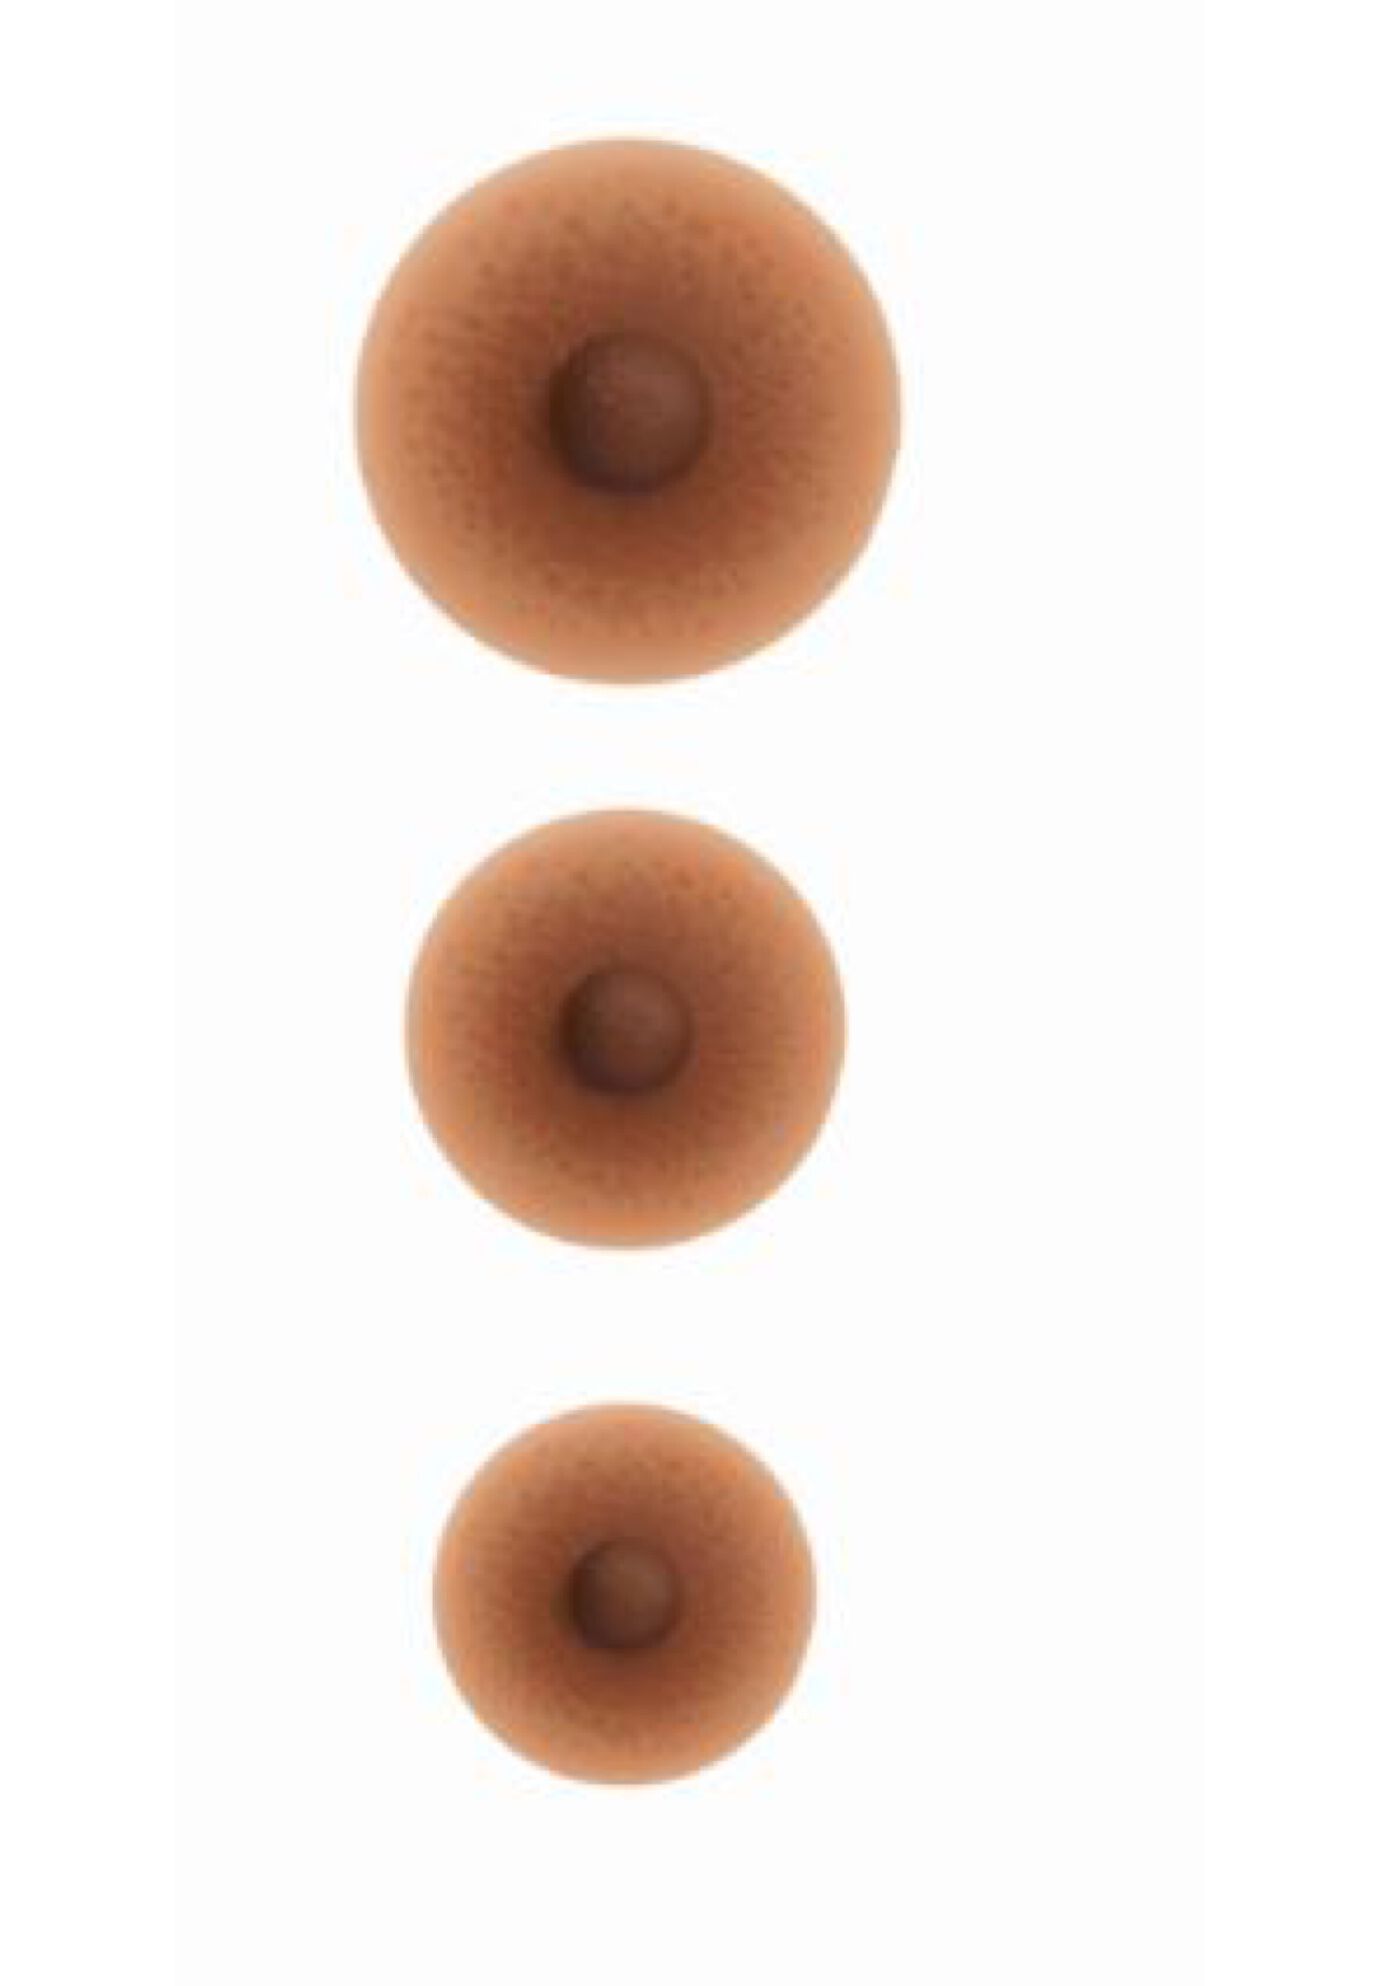 Plus Size Women's Adhesive Nipples Set by Amoena in Tawny (Size L)